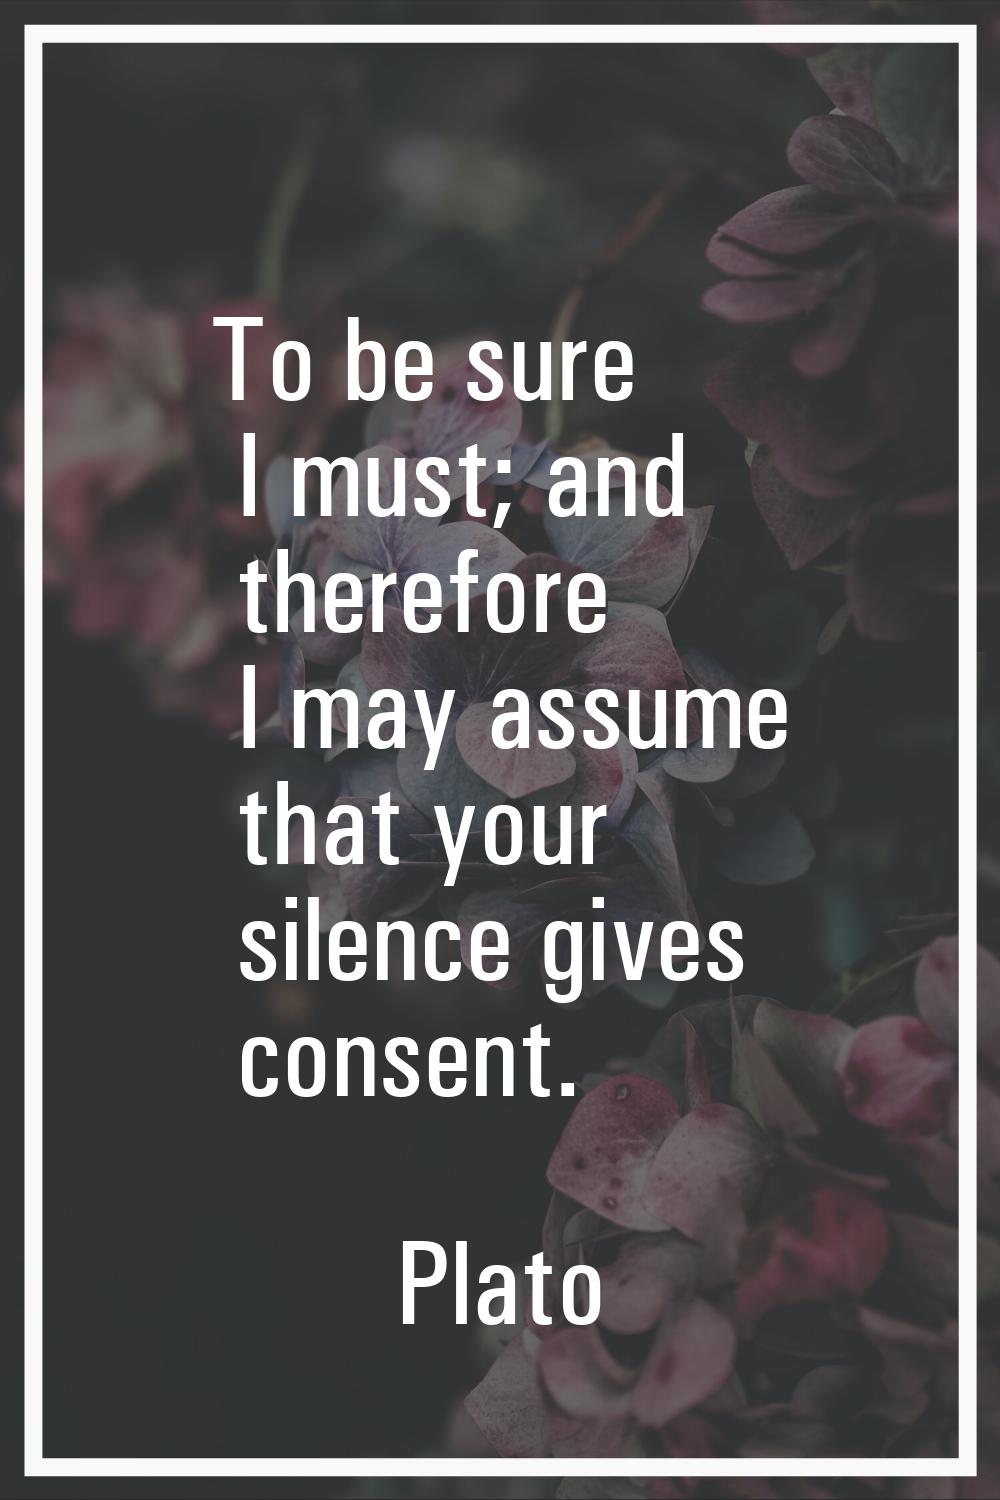 To be sure I must; and therefore I may assume that your silence gives consent.